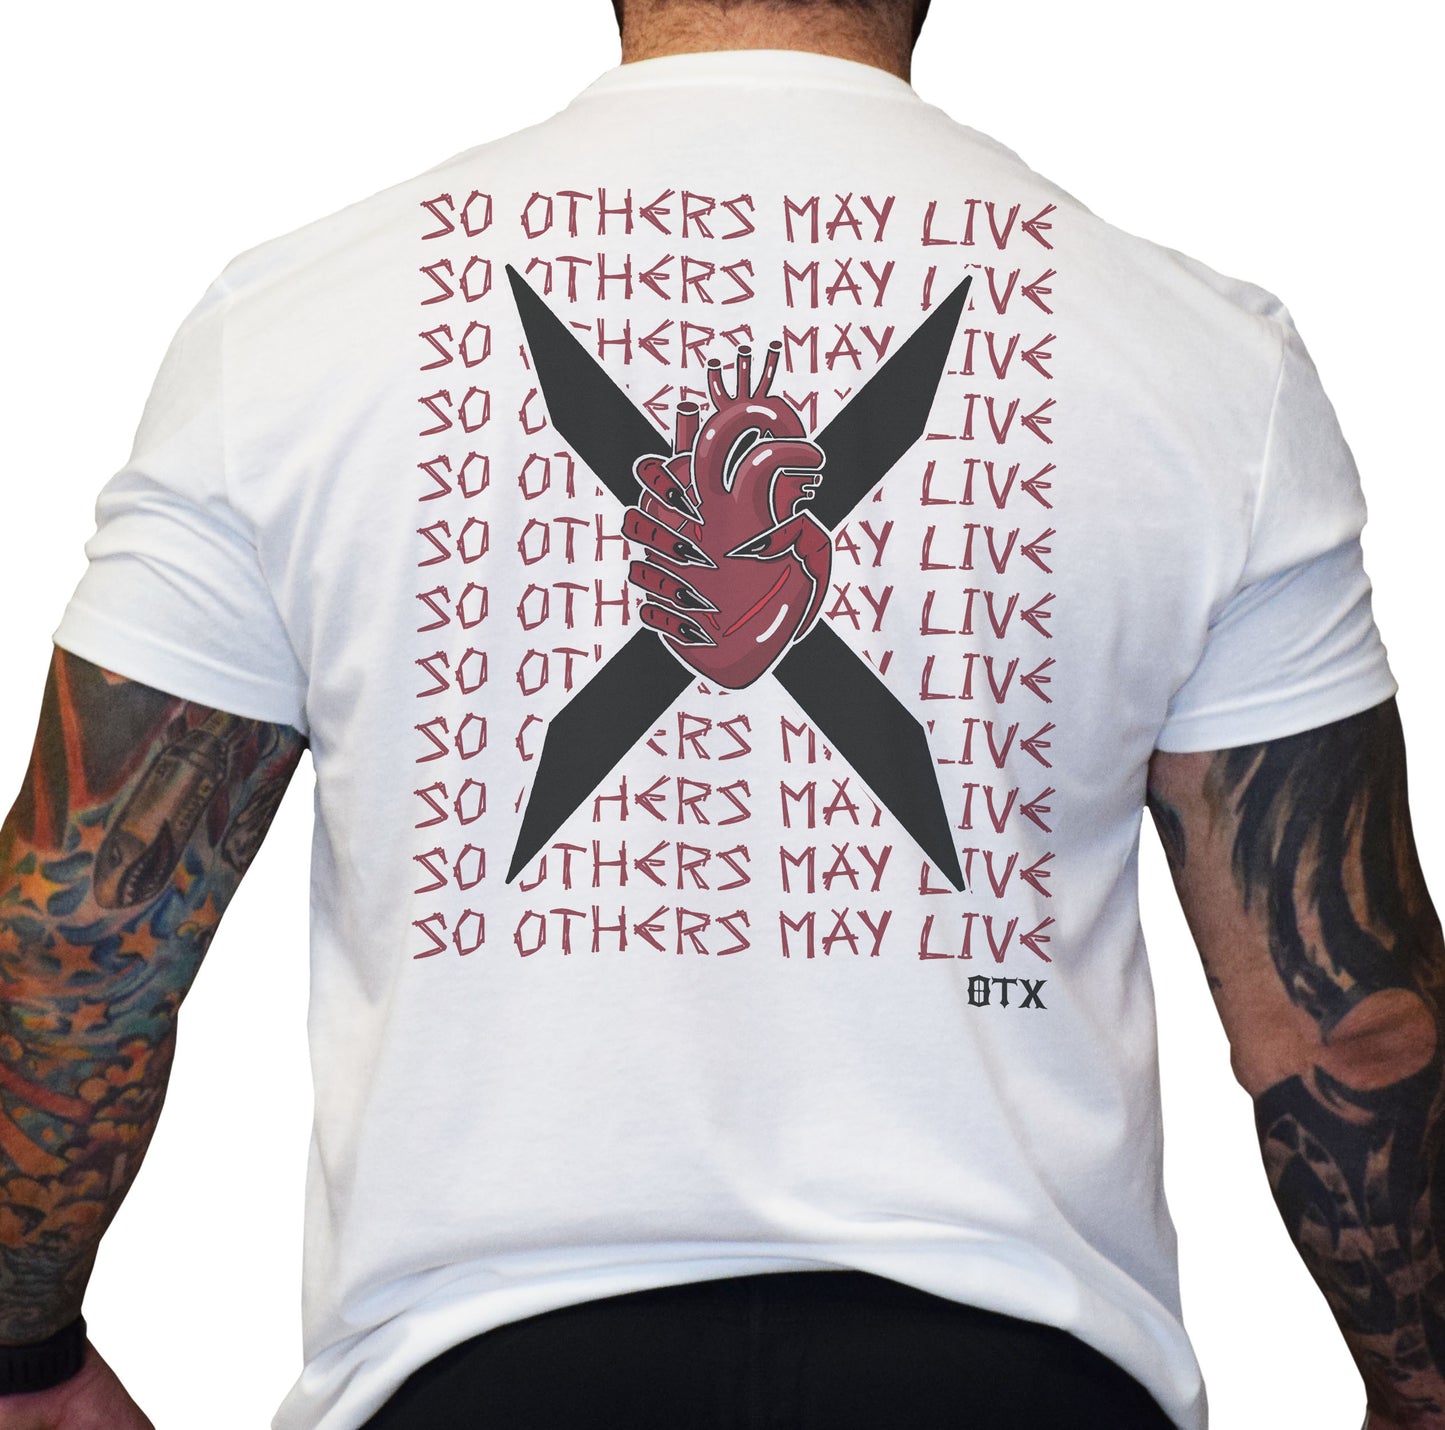 Others May Live Tee